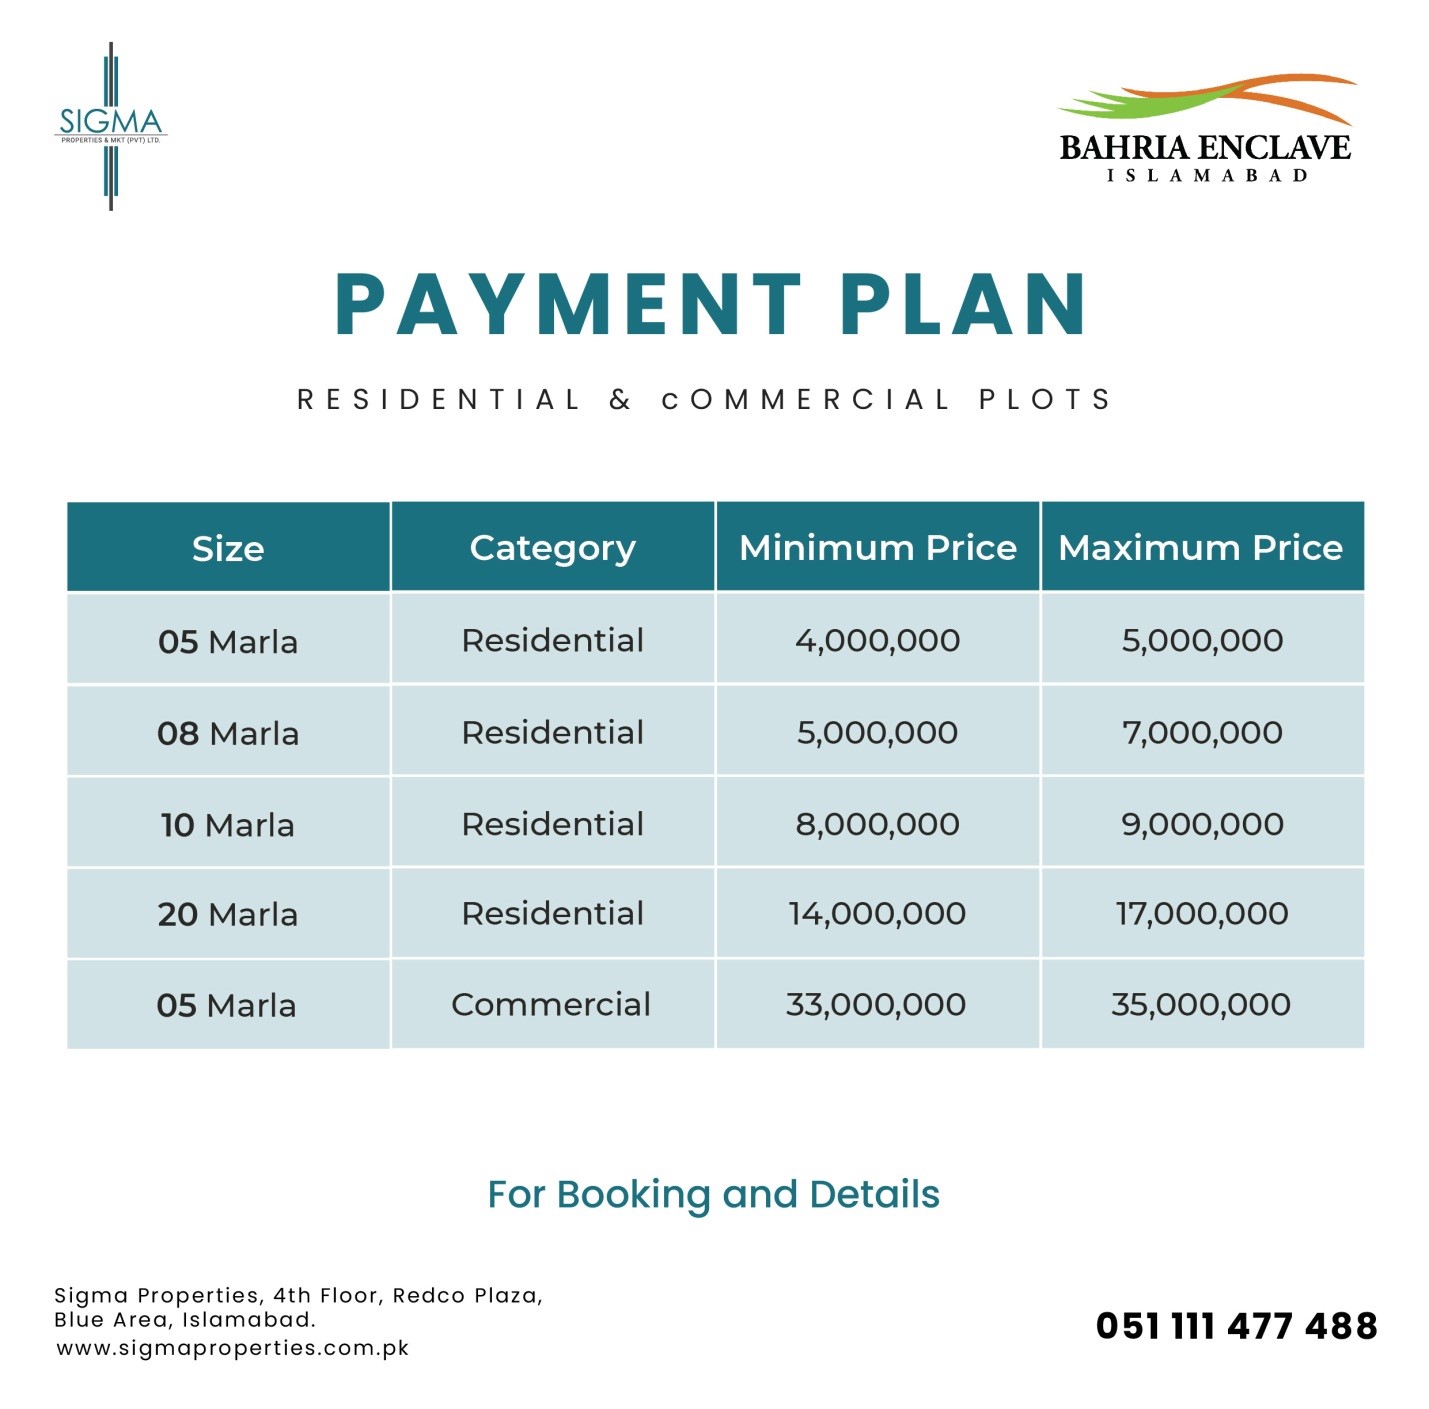 Bahria Enclave Islamabad Payment plan